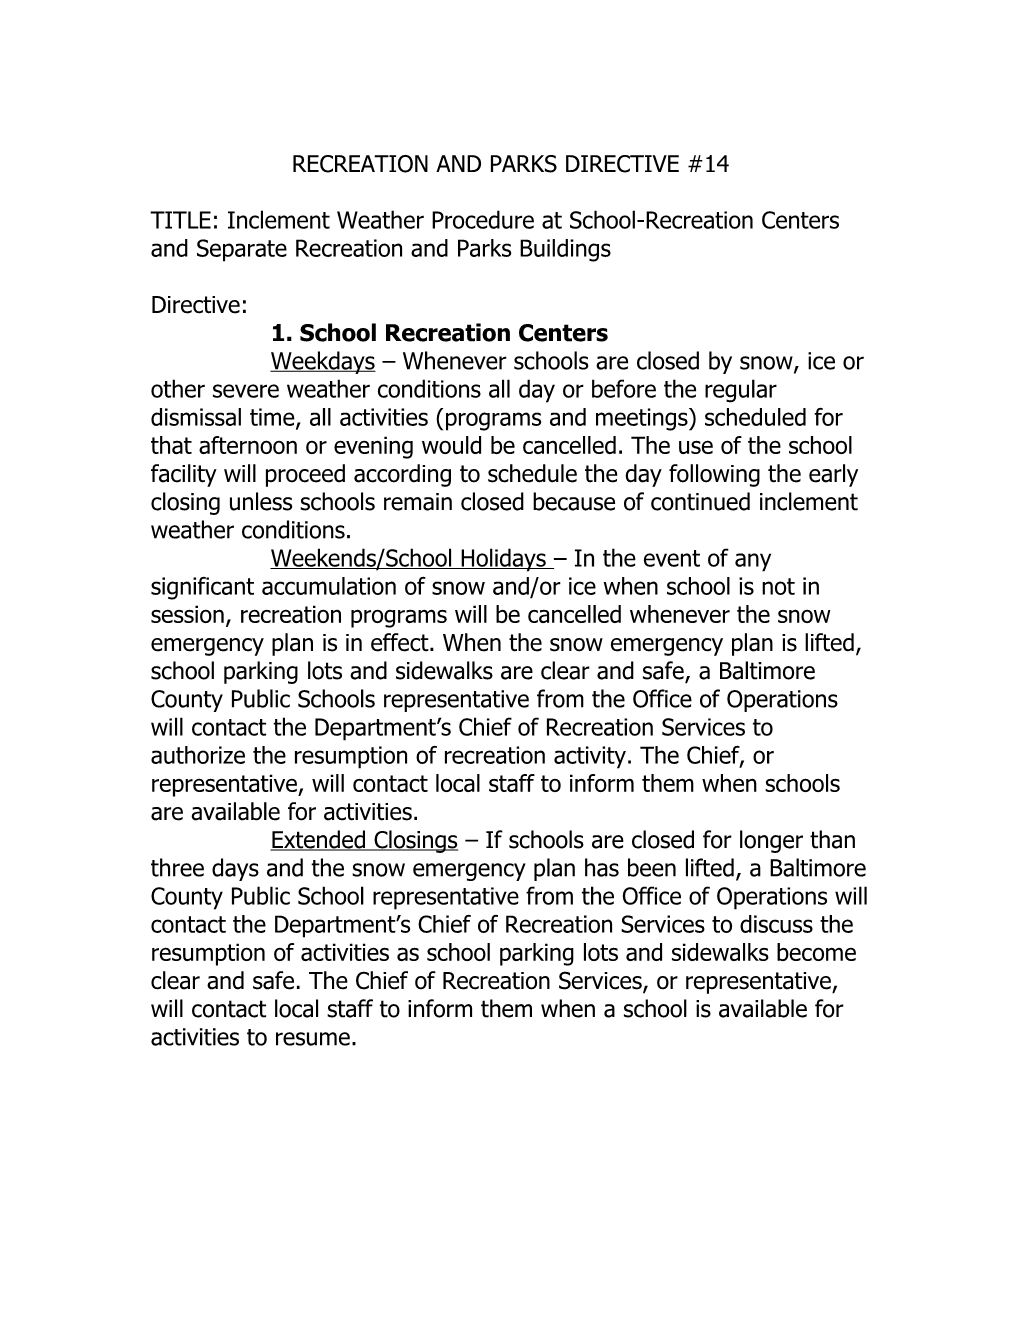 Recreation and Parks Directive #14